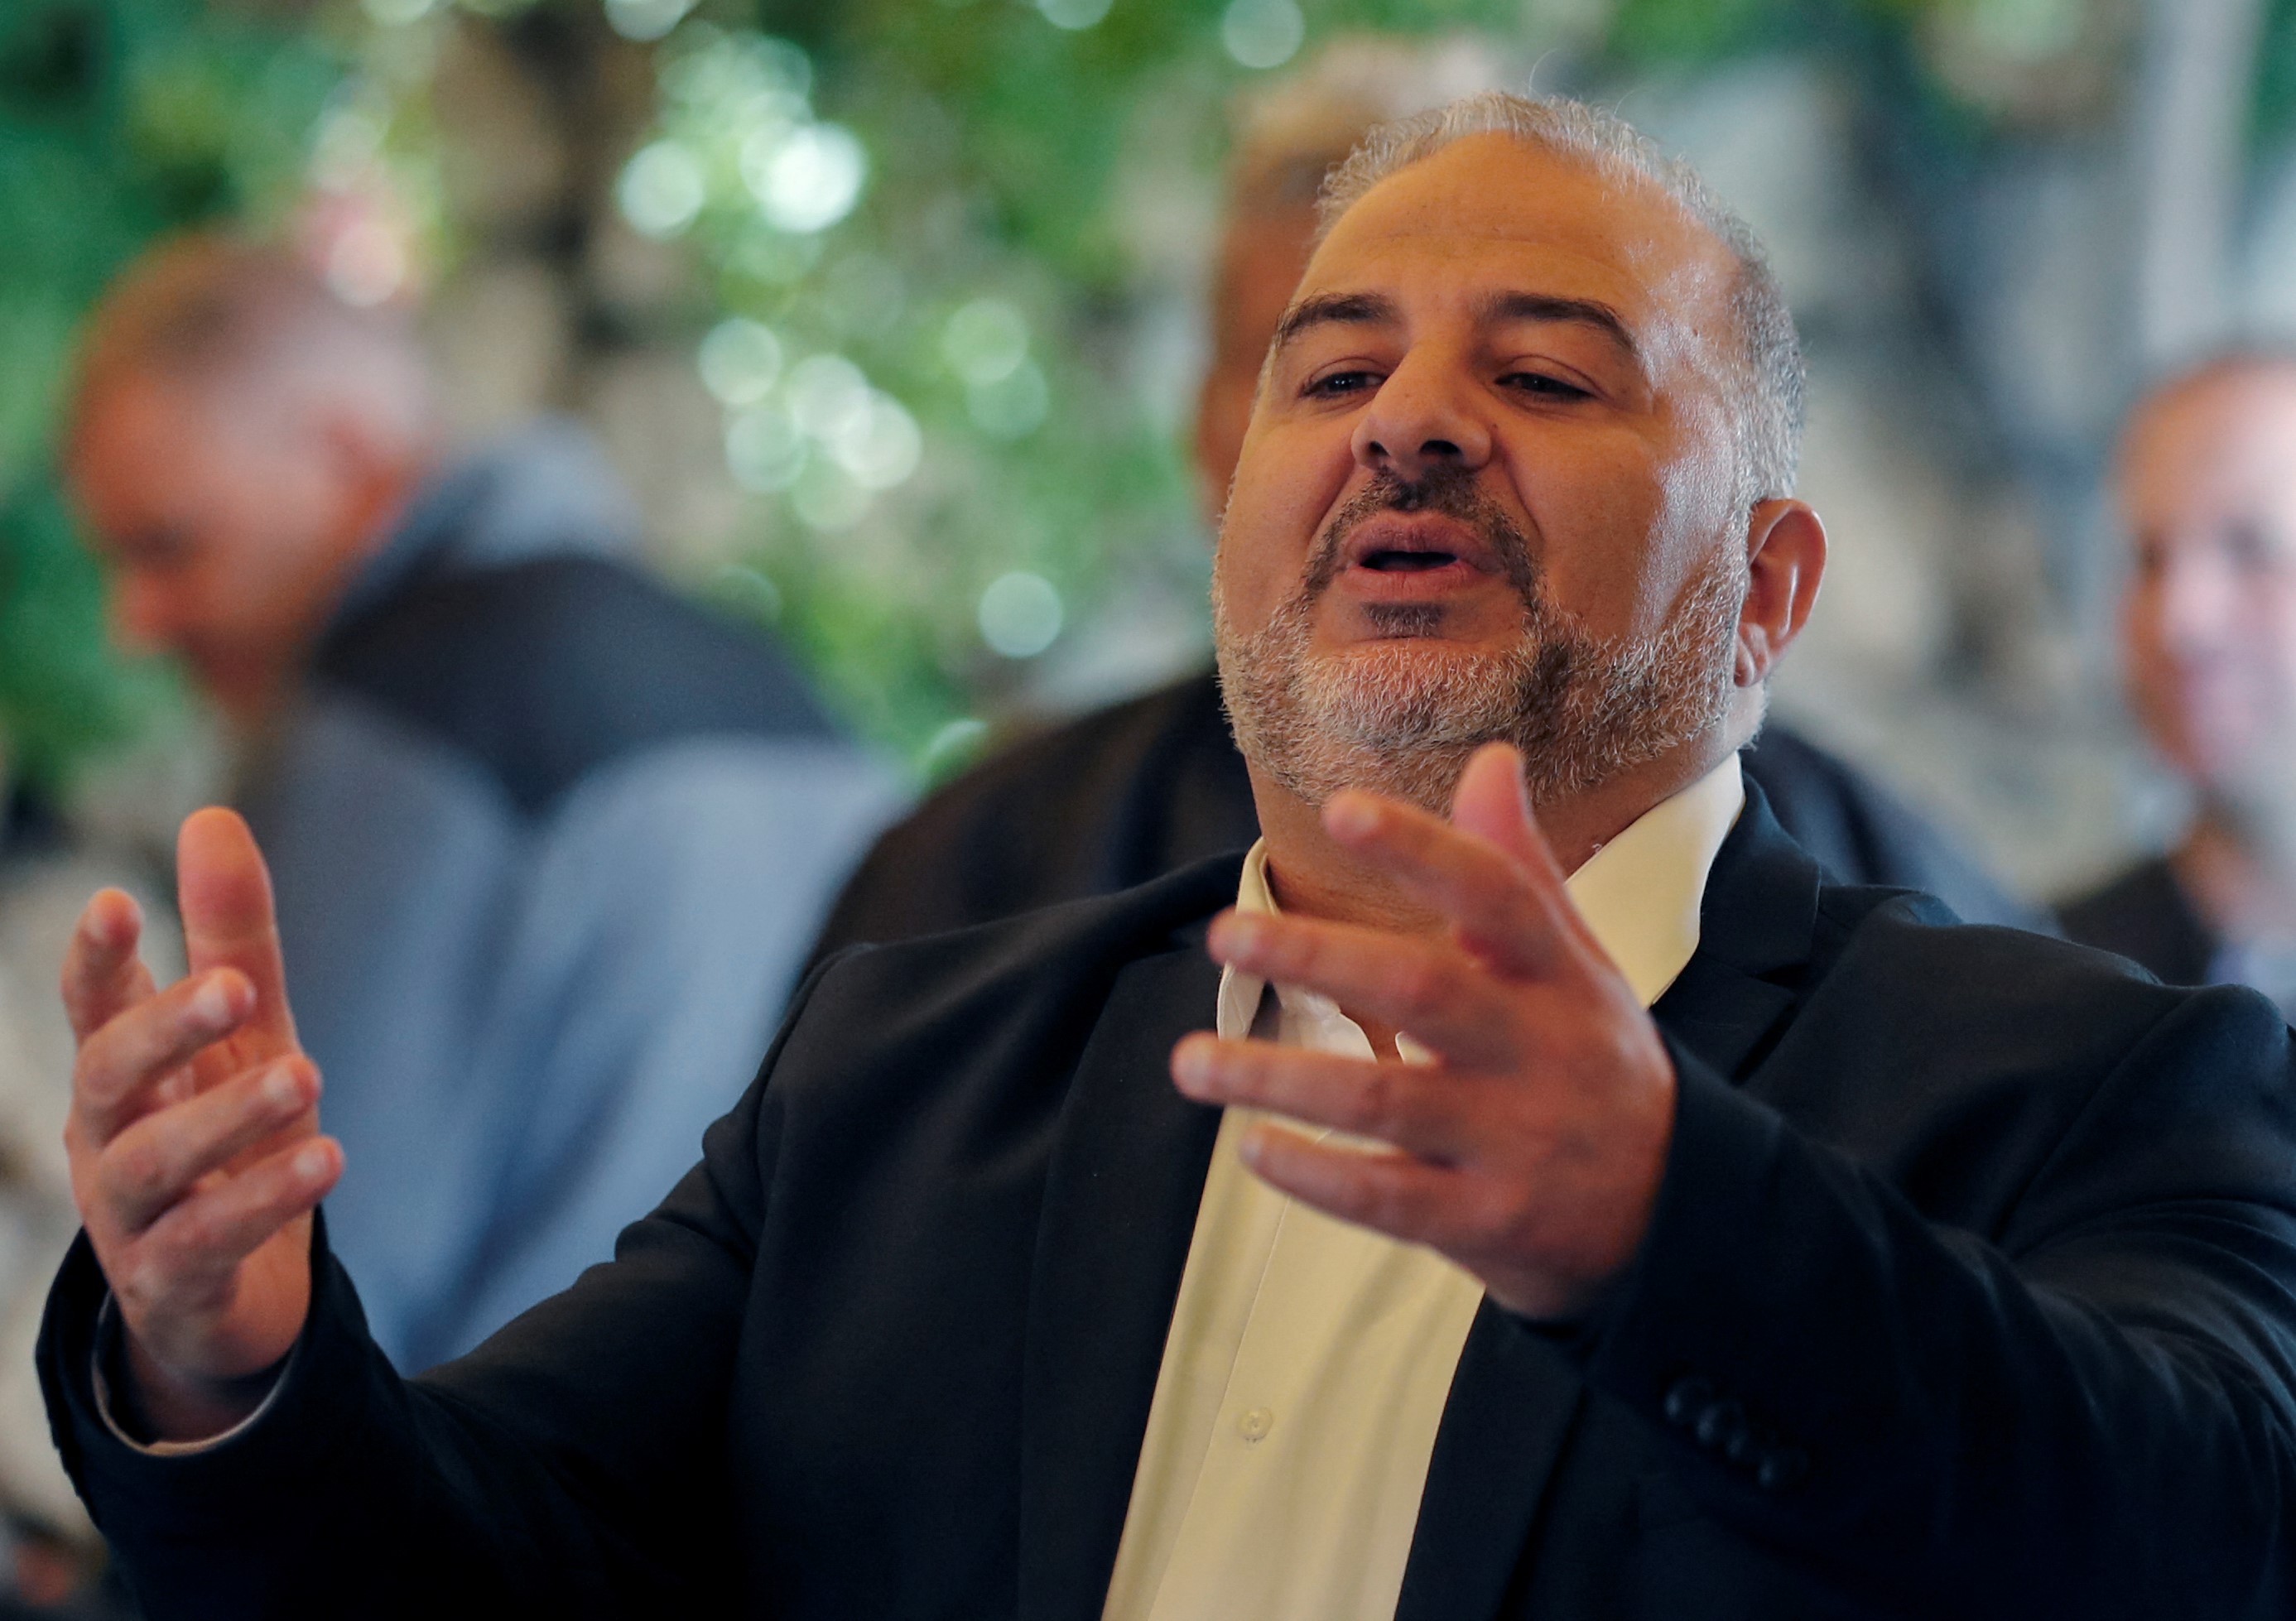 Mansour Abbas, head of the conservative Islamic Raam party, speaks to a crowd during a political gathering to congratulate him on the electoral victory in the northern Israeli village of Maghar on March 26, 2021